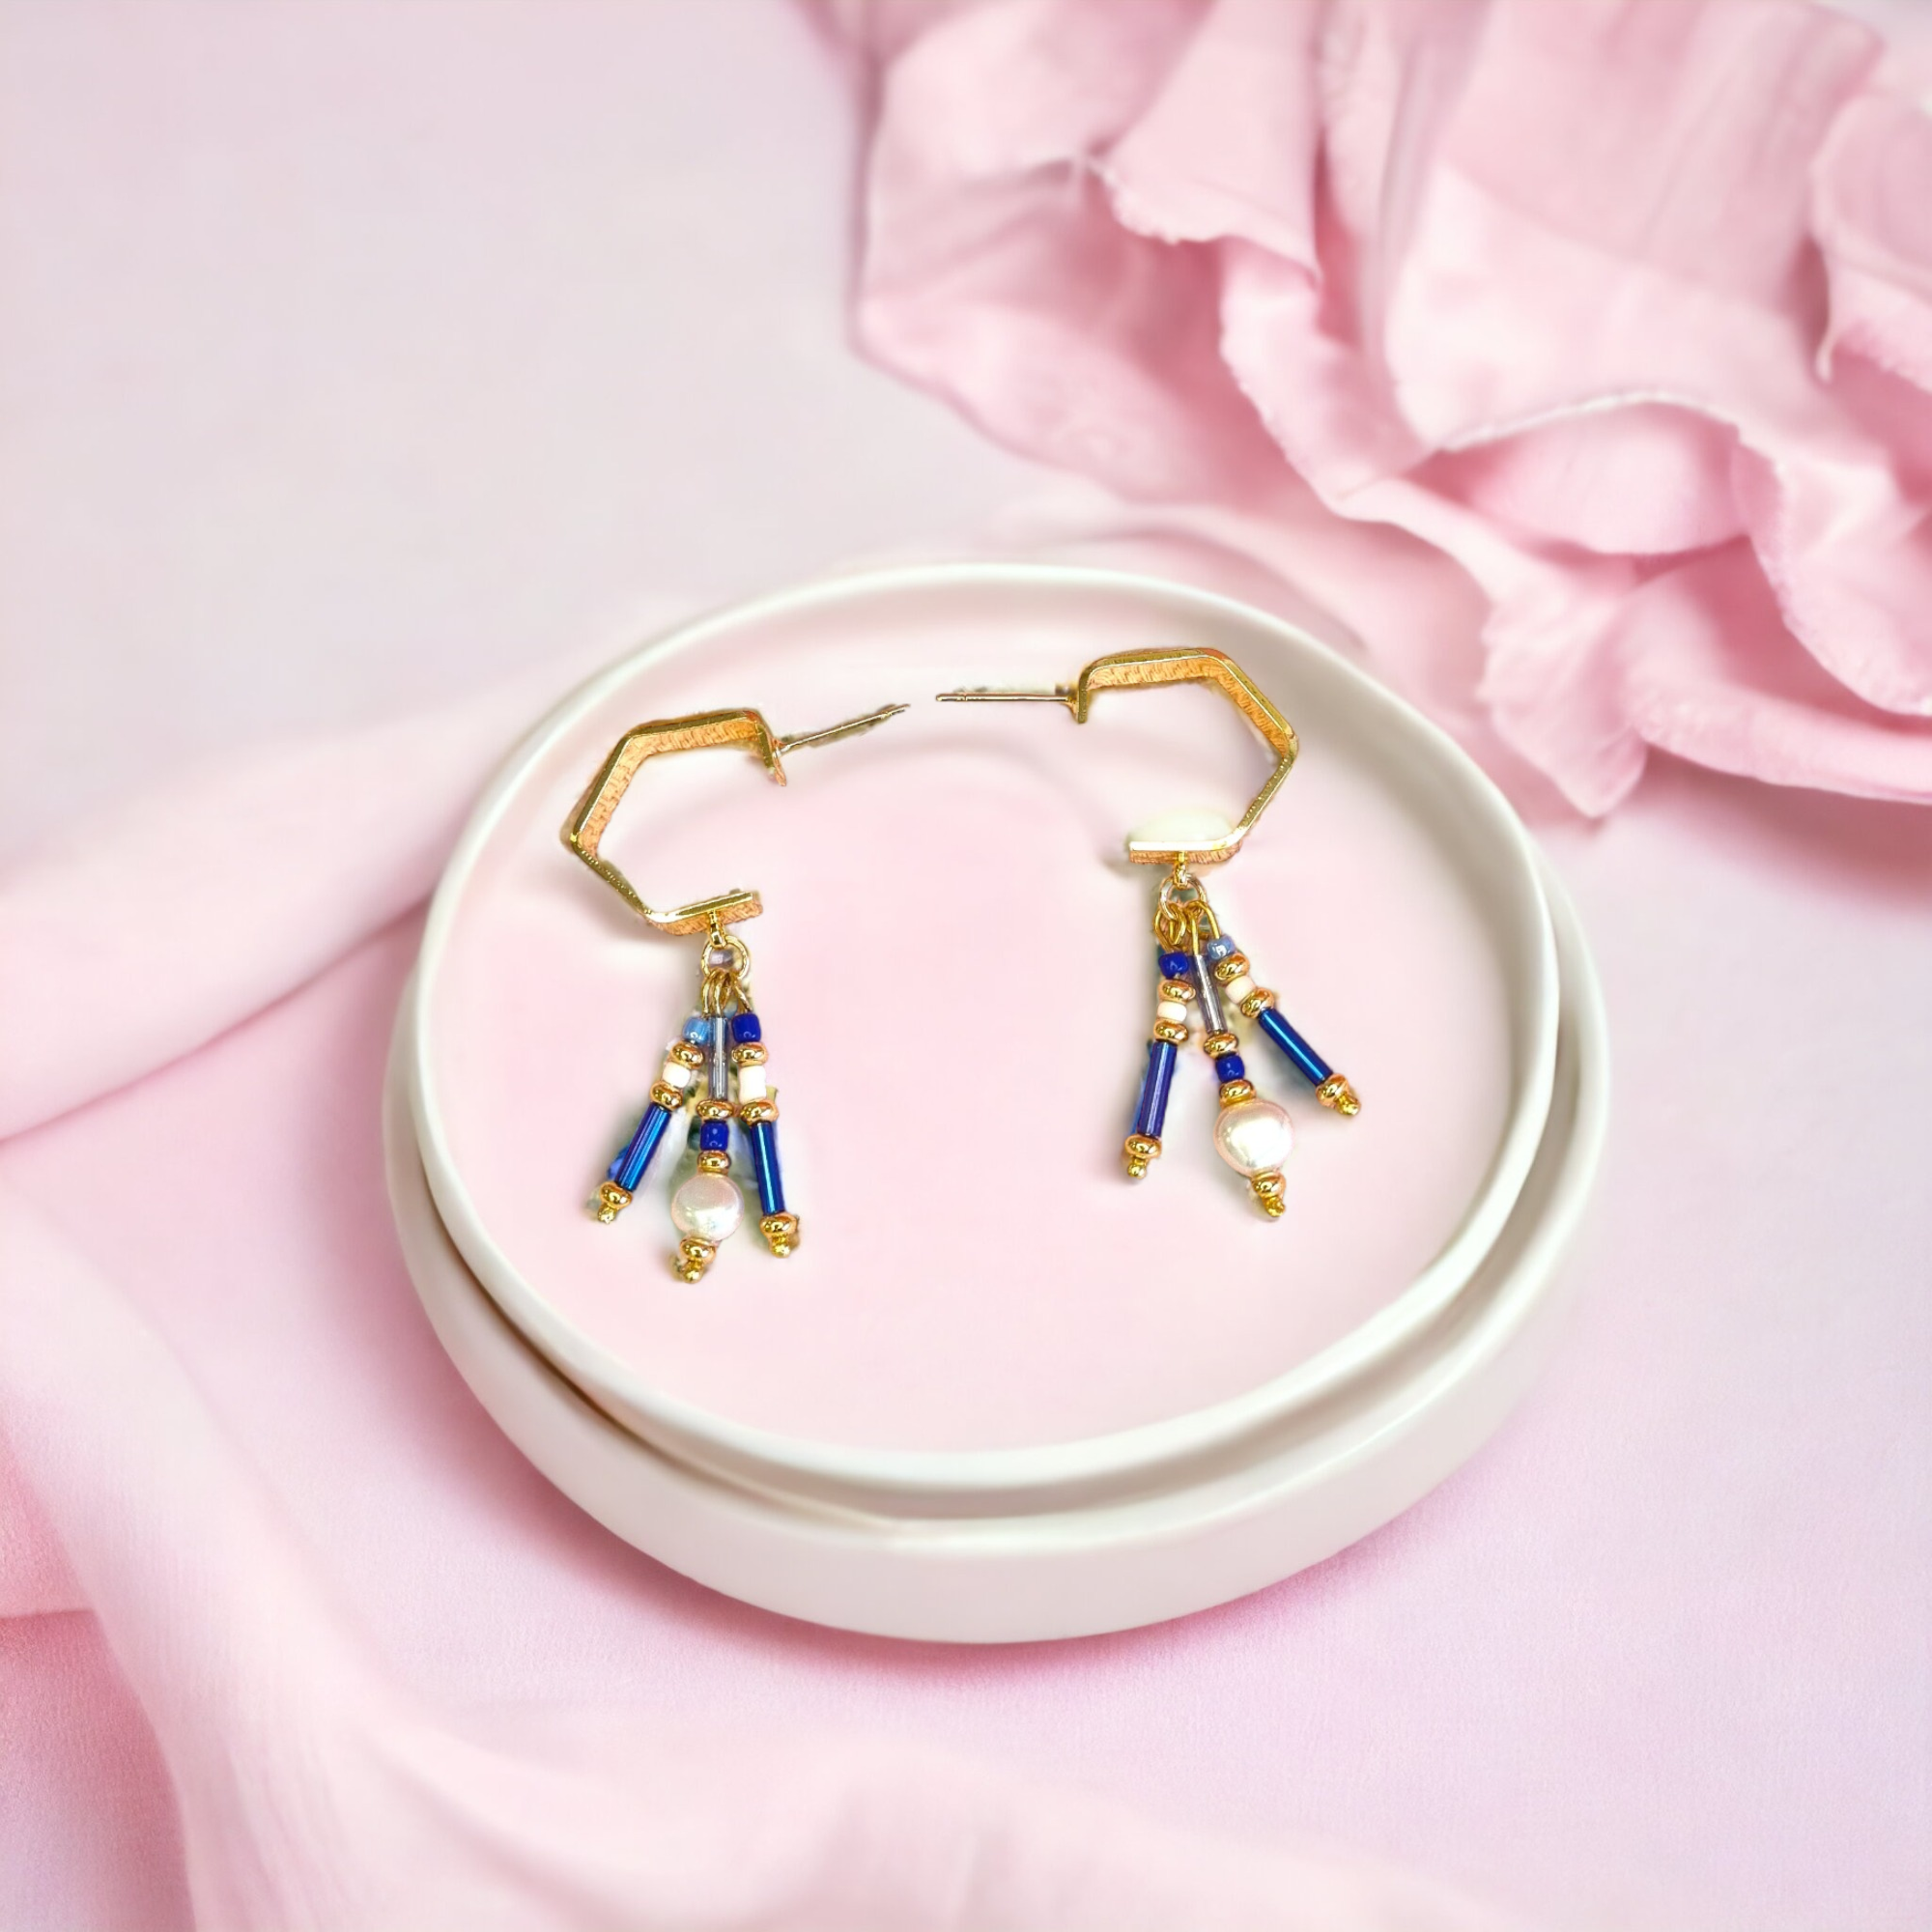 Gold Hexagon Hoop With Blue Beads and Freshwater Pearls Earrings